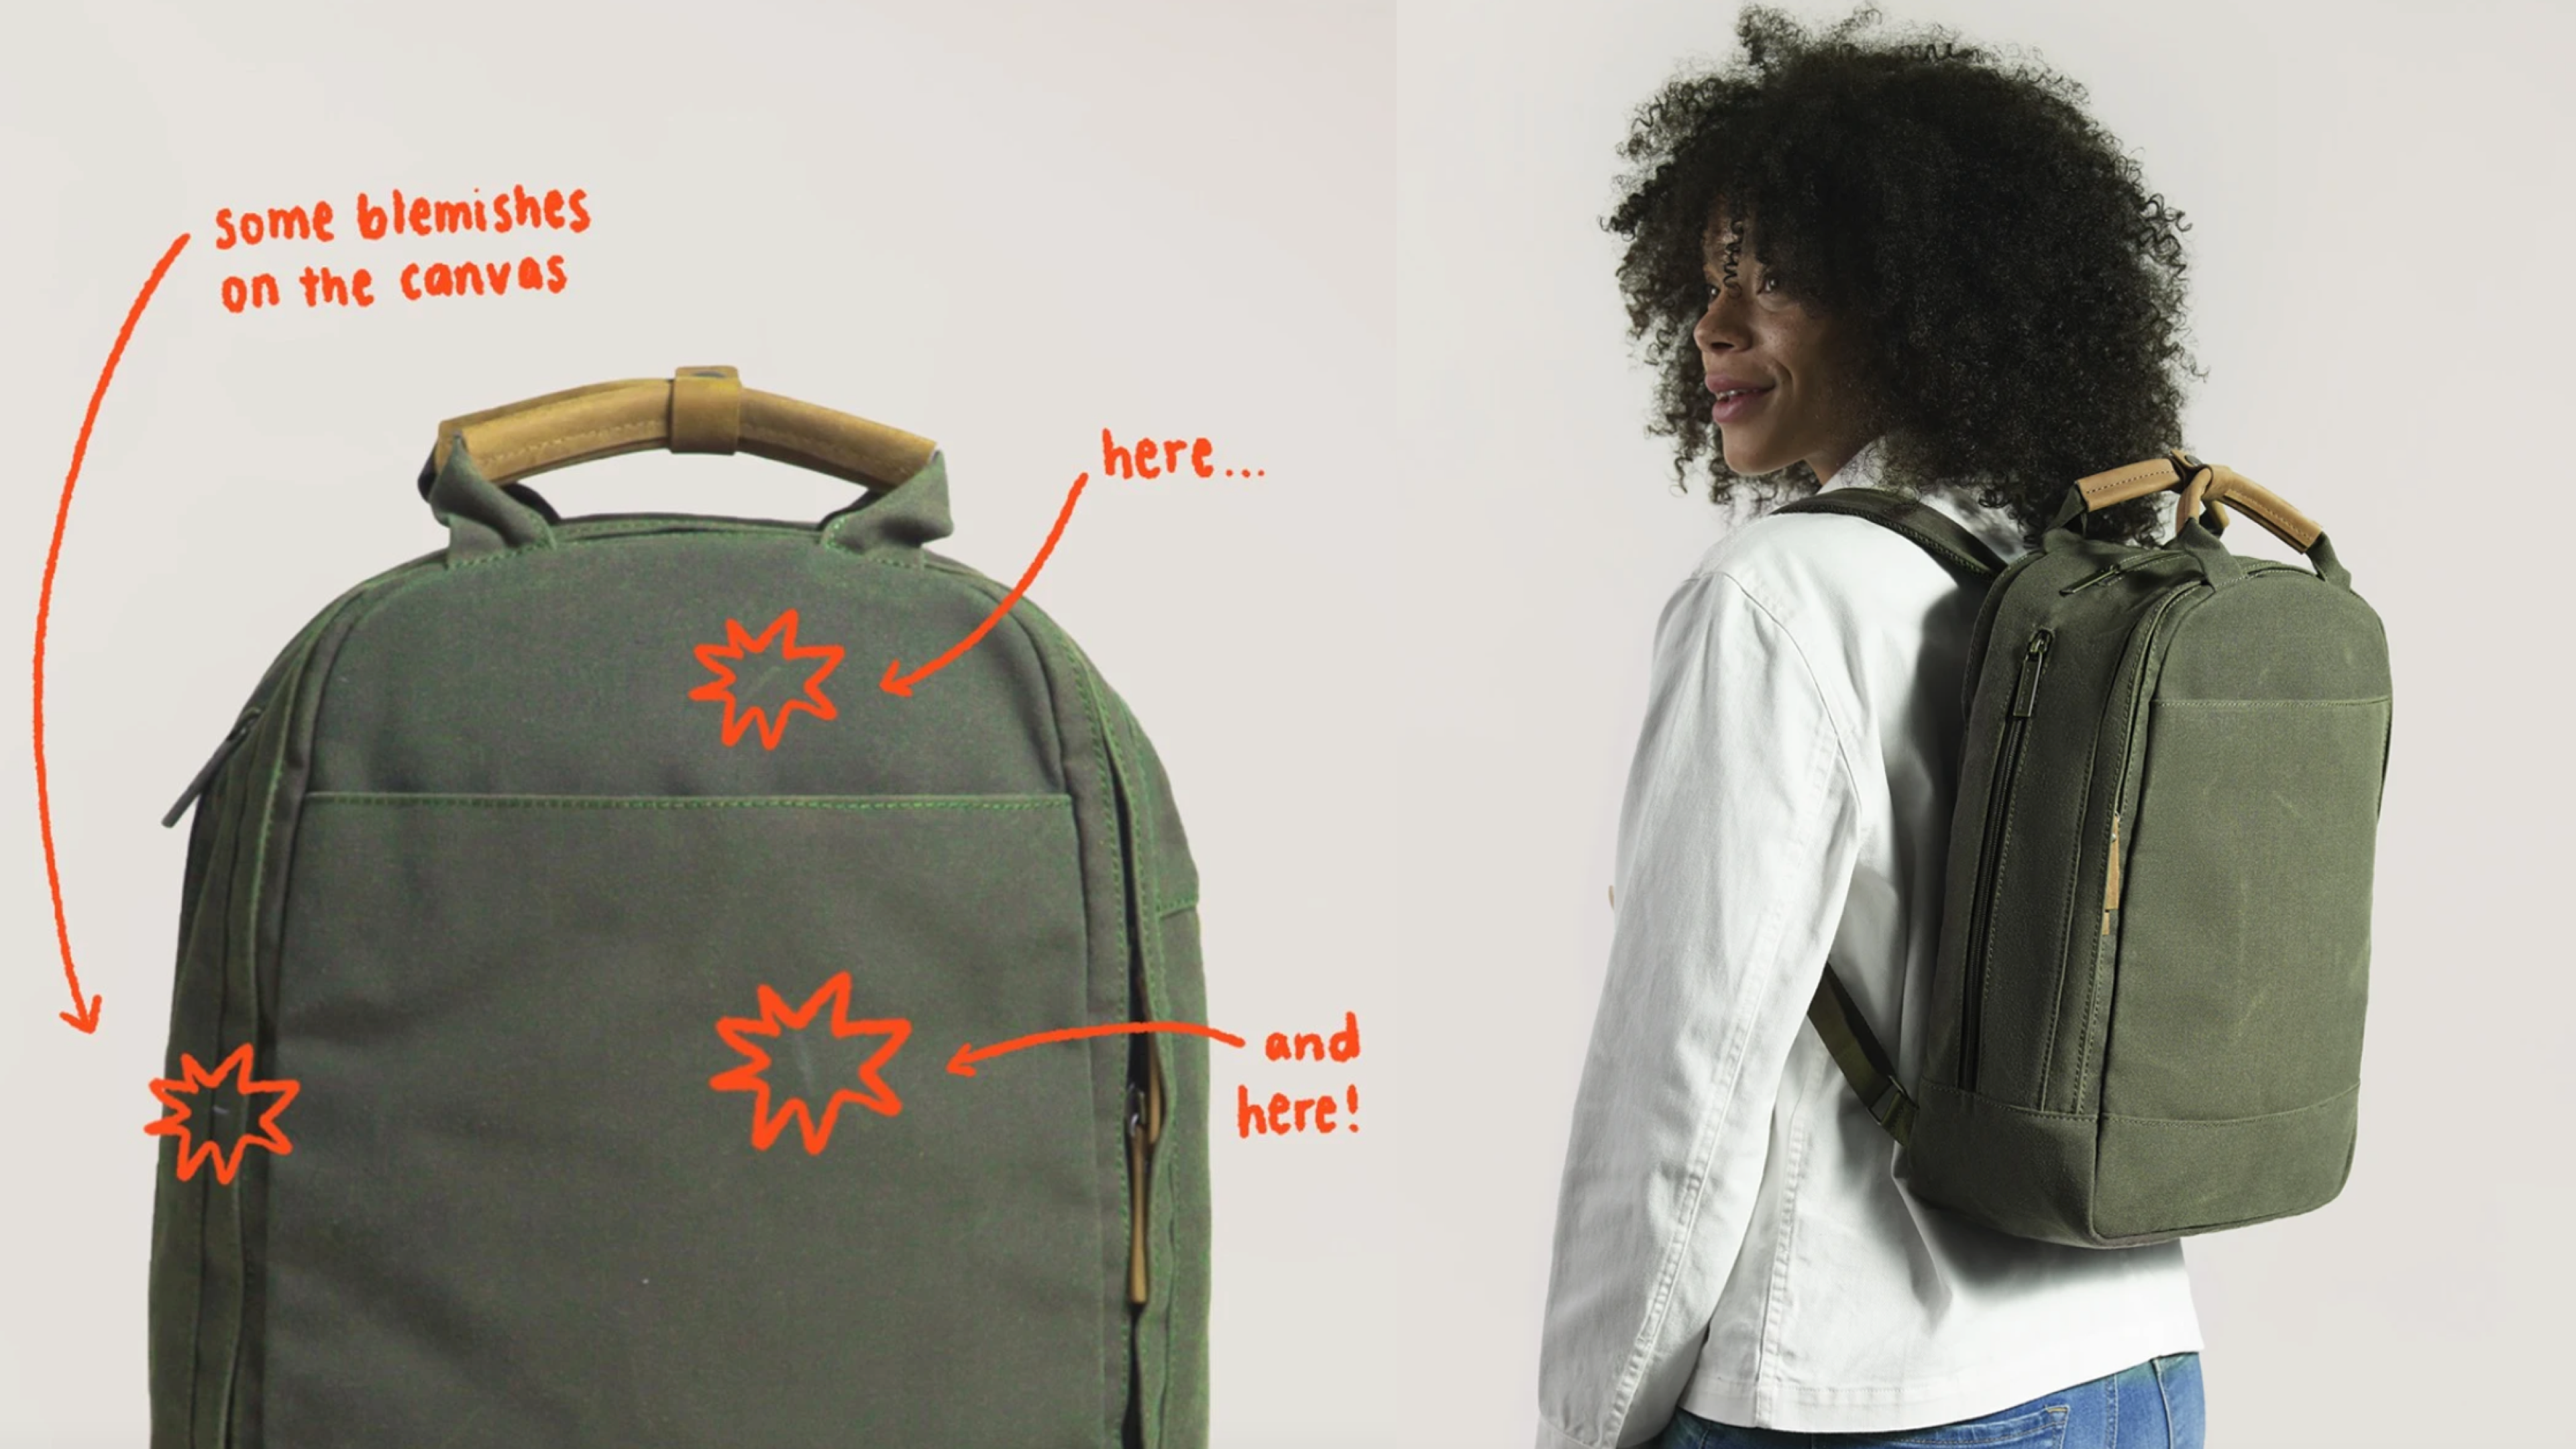 backpacks with slight cosmetic defects that are sold for less